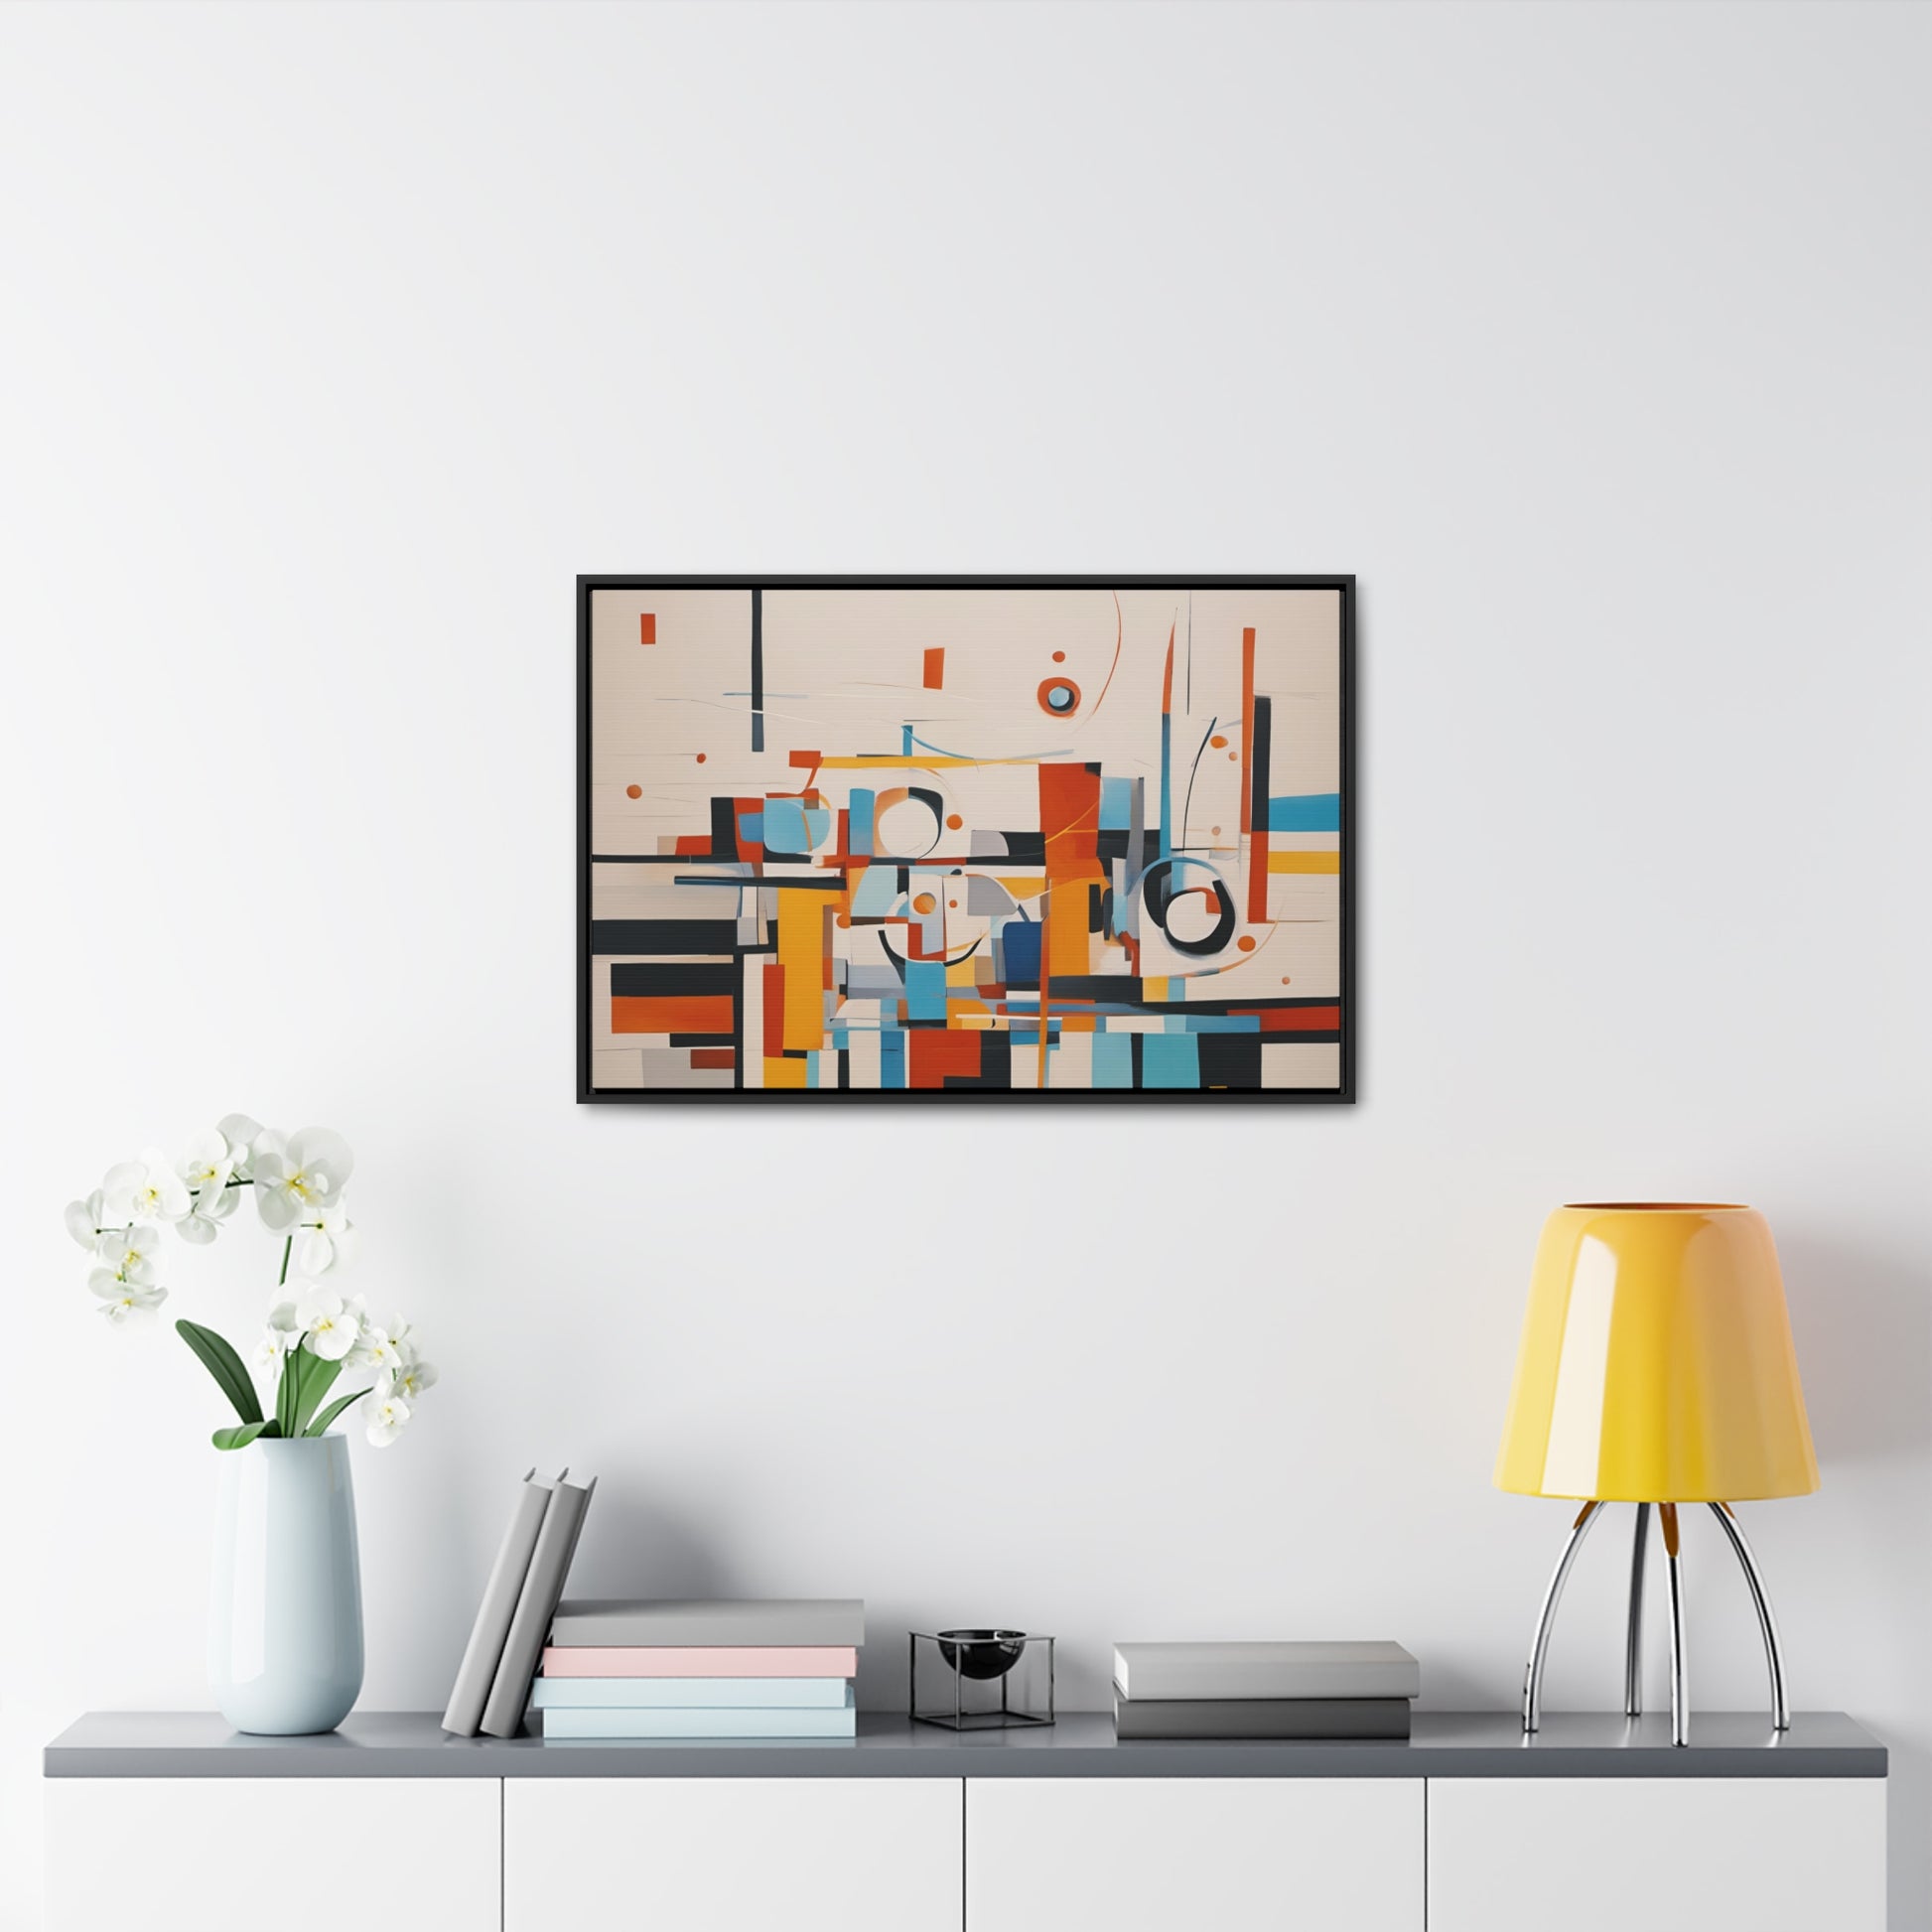 Modern Art Wall Print Mid Century Cubism Print on Canvas in a Floating Frame 30x20 Hung